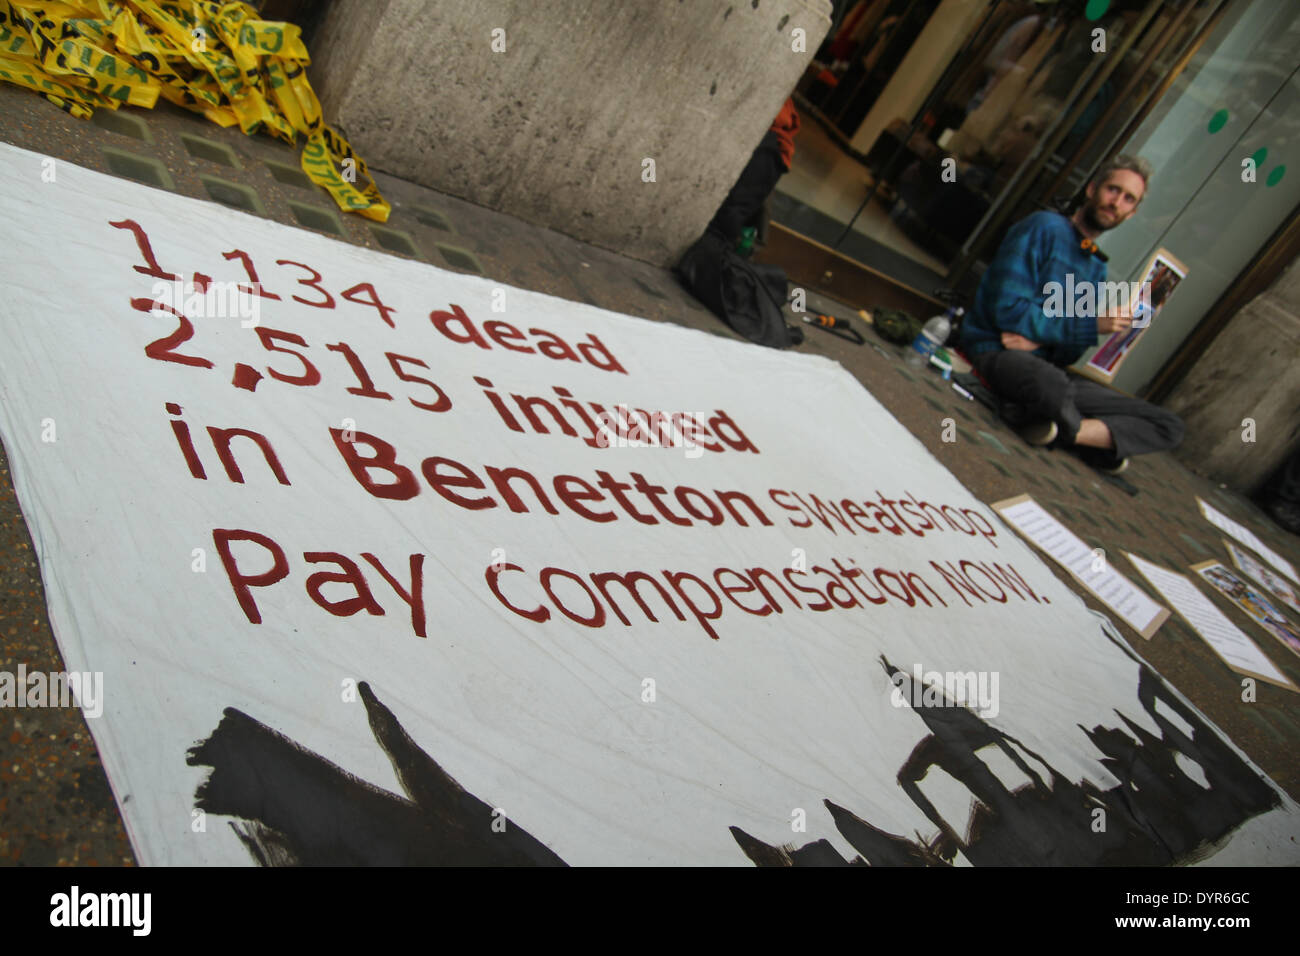 London, UK. 24th April 2014. A large banner seen between the two chained protesters outside The Benetton store on Oxford Street Credit:  david mbiyu/Alamy Live News Stock Photo